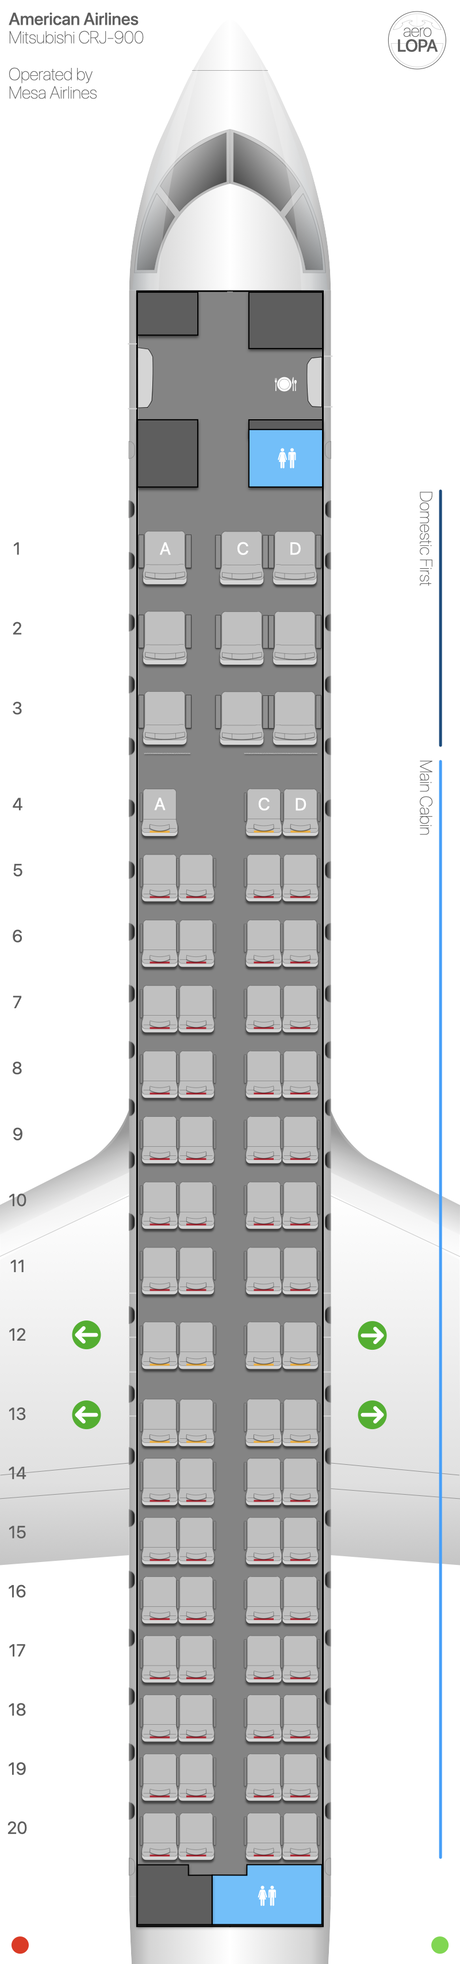 Crowd Source Let S Create The Best Aa Seating Plans Out There Page 5 Flyertalk Forums